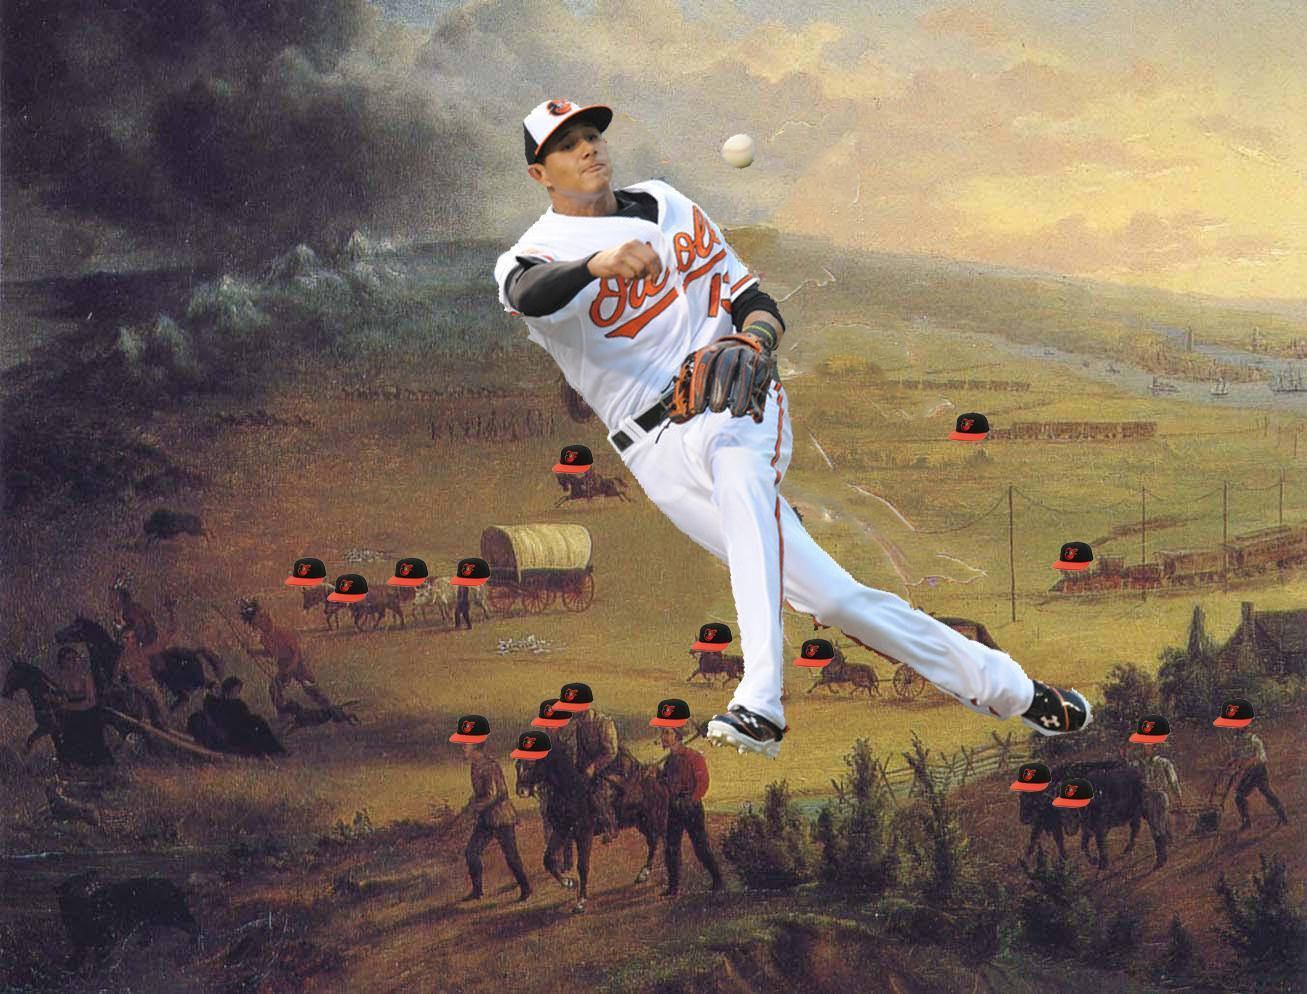 Baltimore Orioles Twitter पर A new month calls for new phone wallpaper   Try out this one of Manny Machado sporting the Friday black Birdland  httpstcotJ4CYE3mLz  Twitter